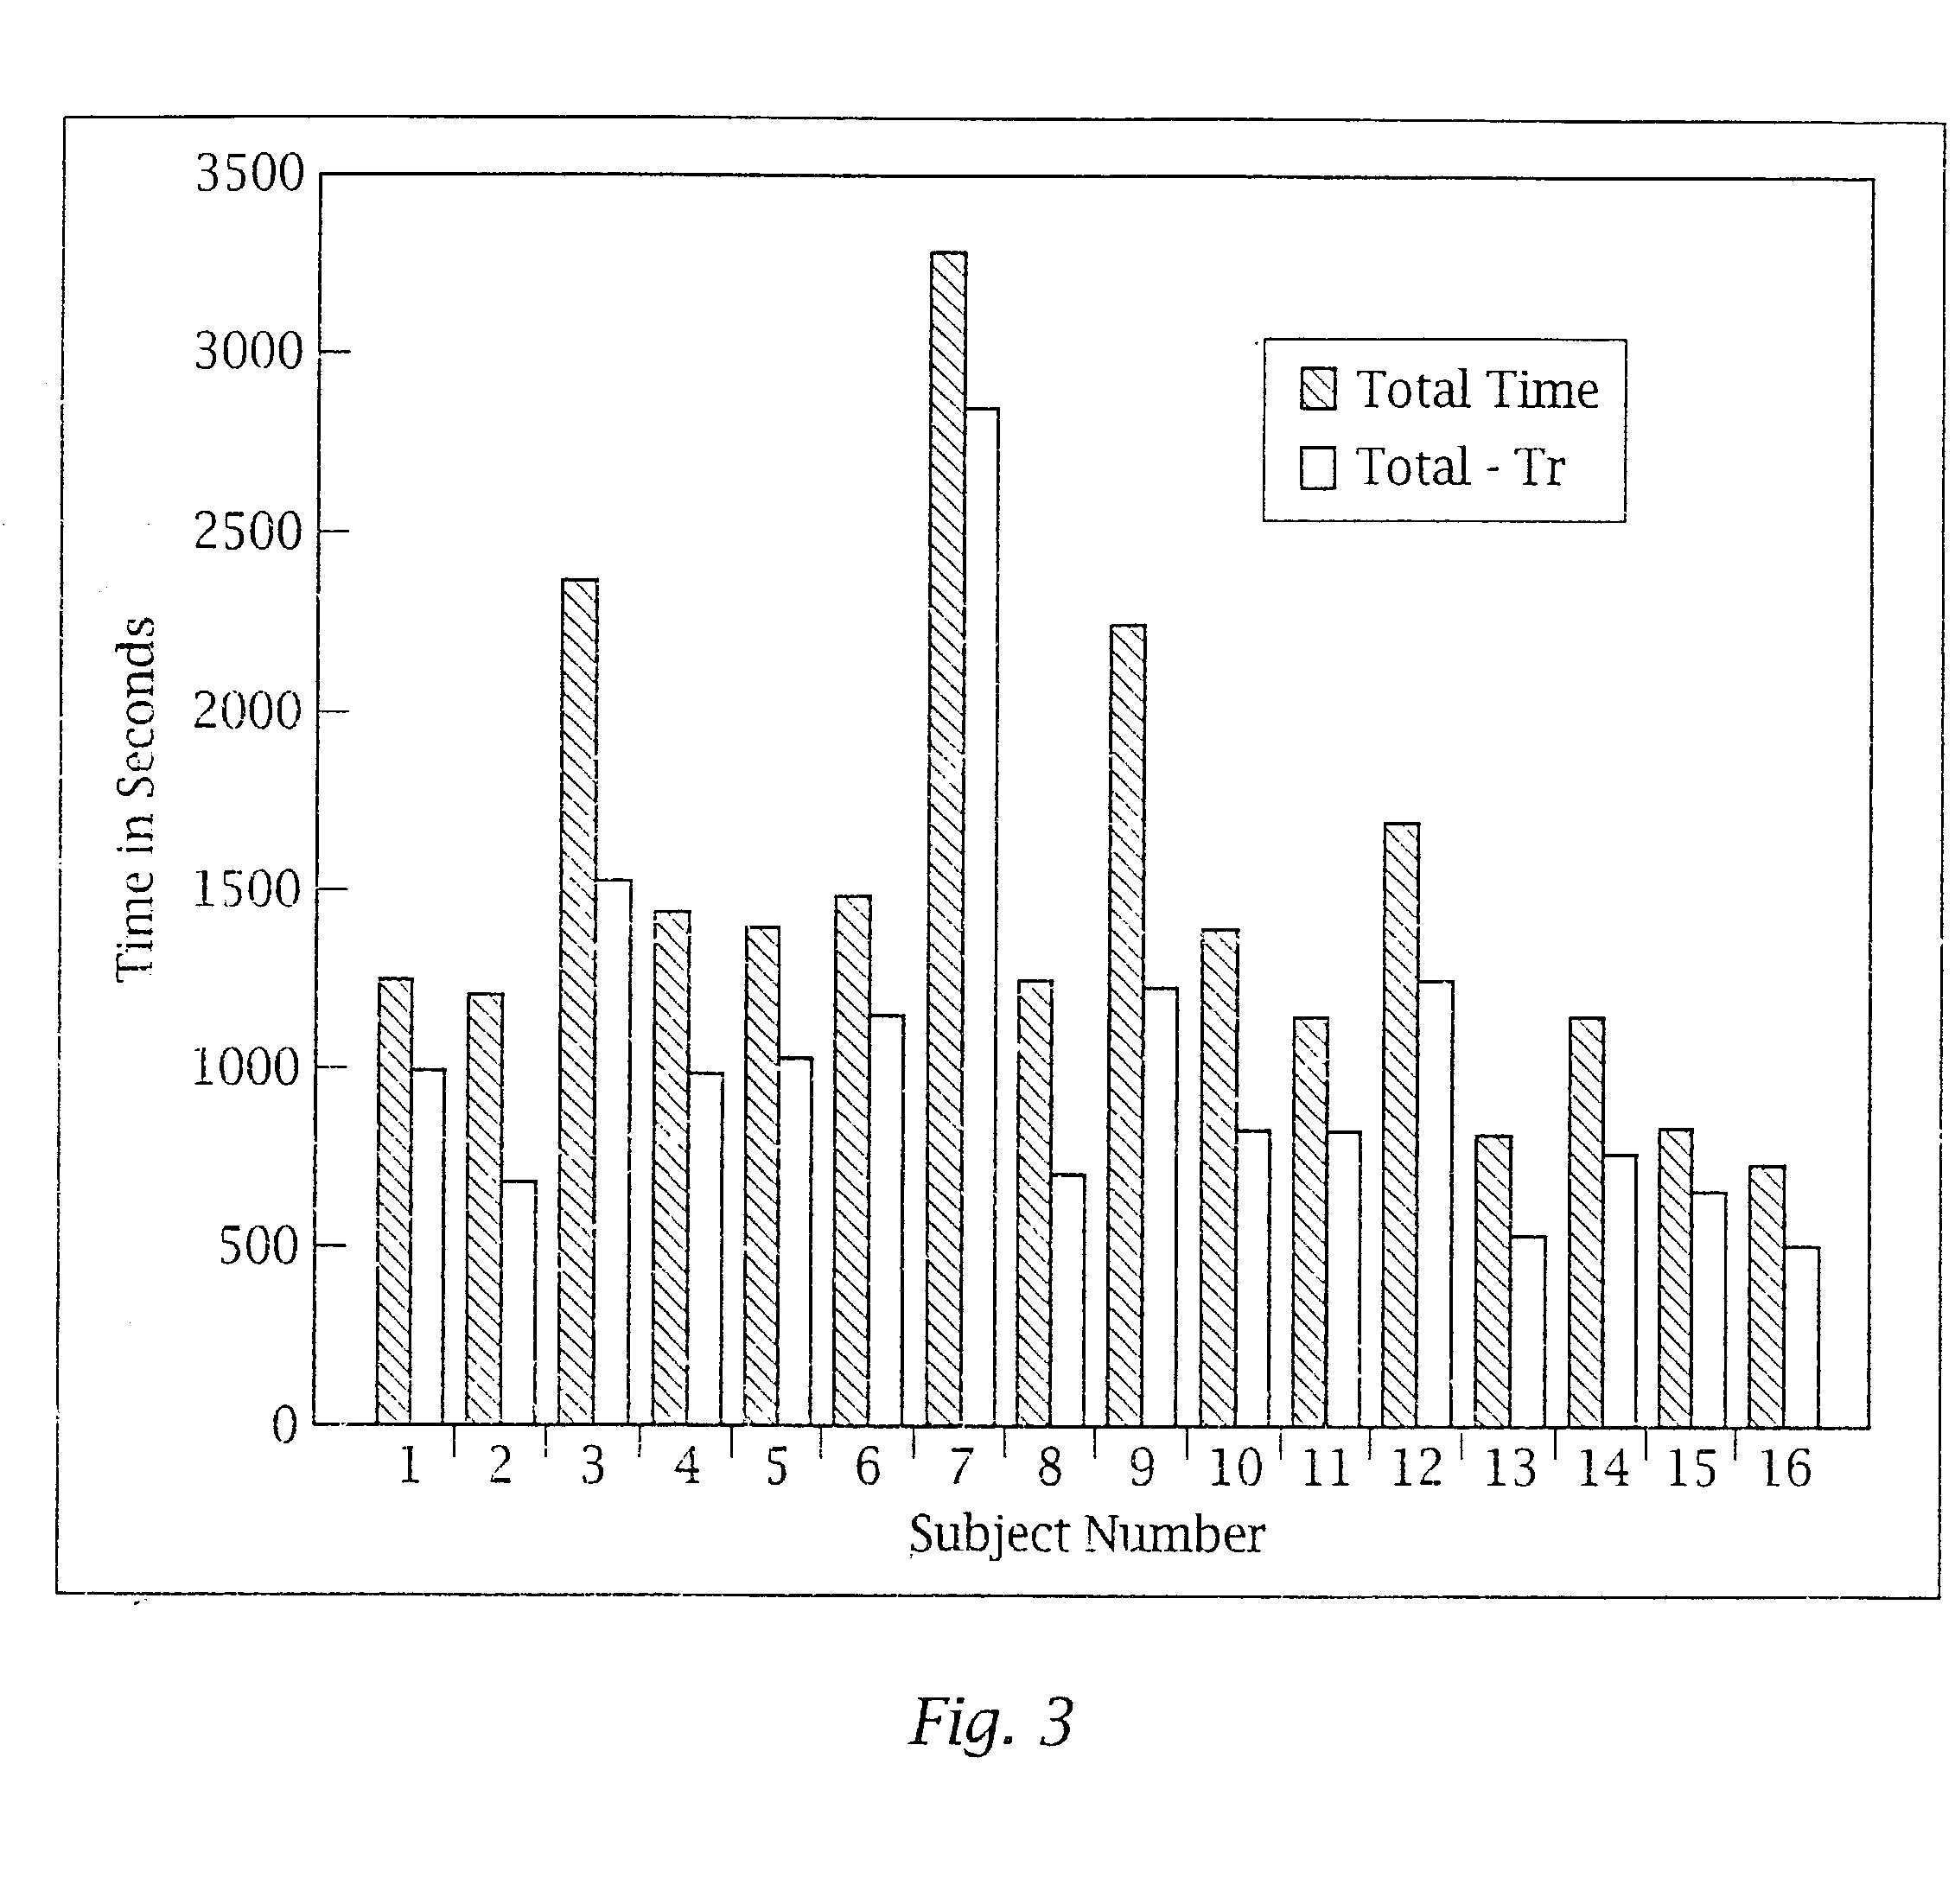 Media recording device with packet data interface